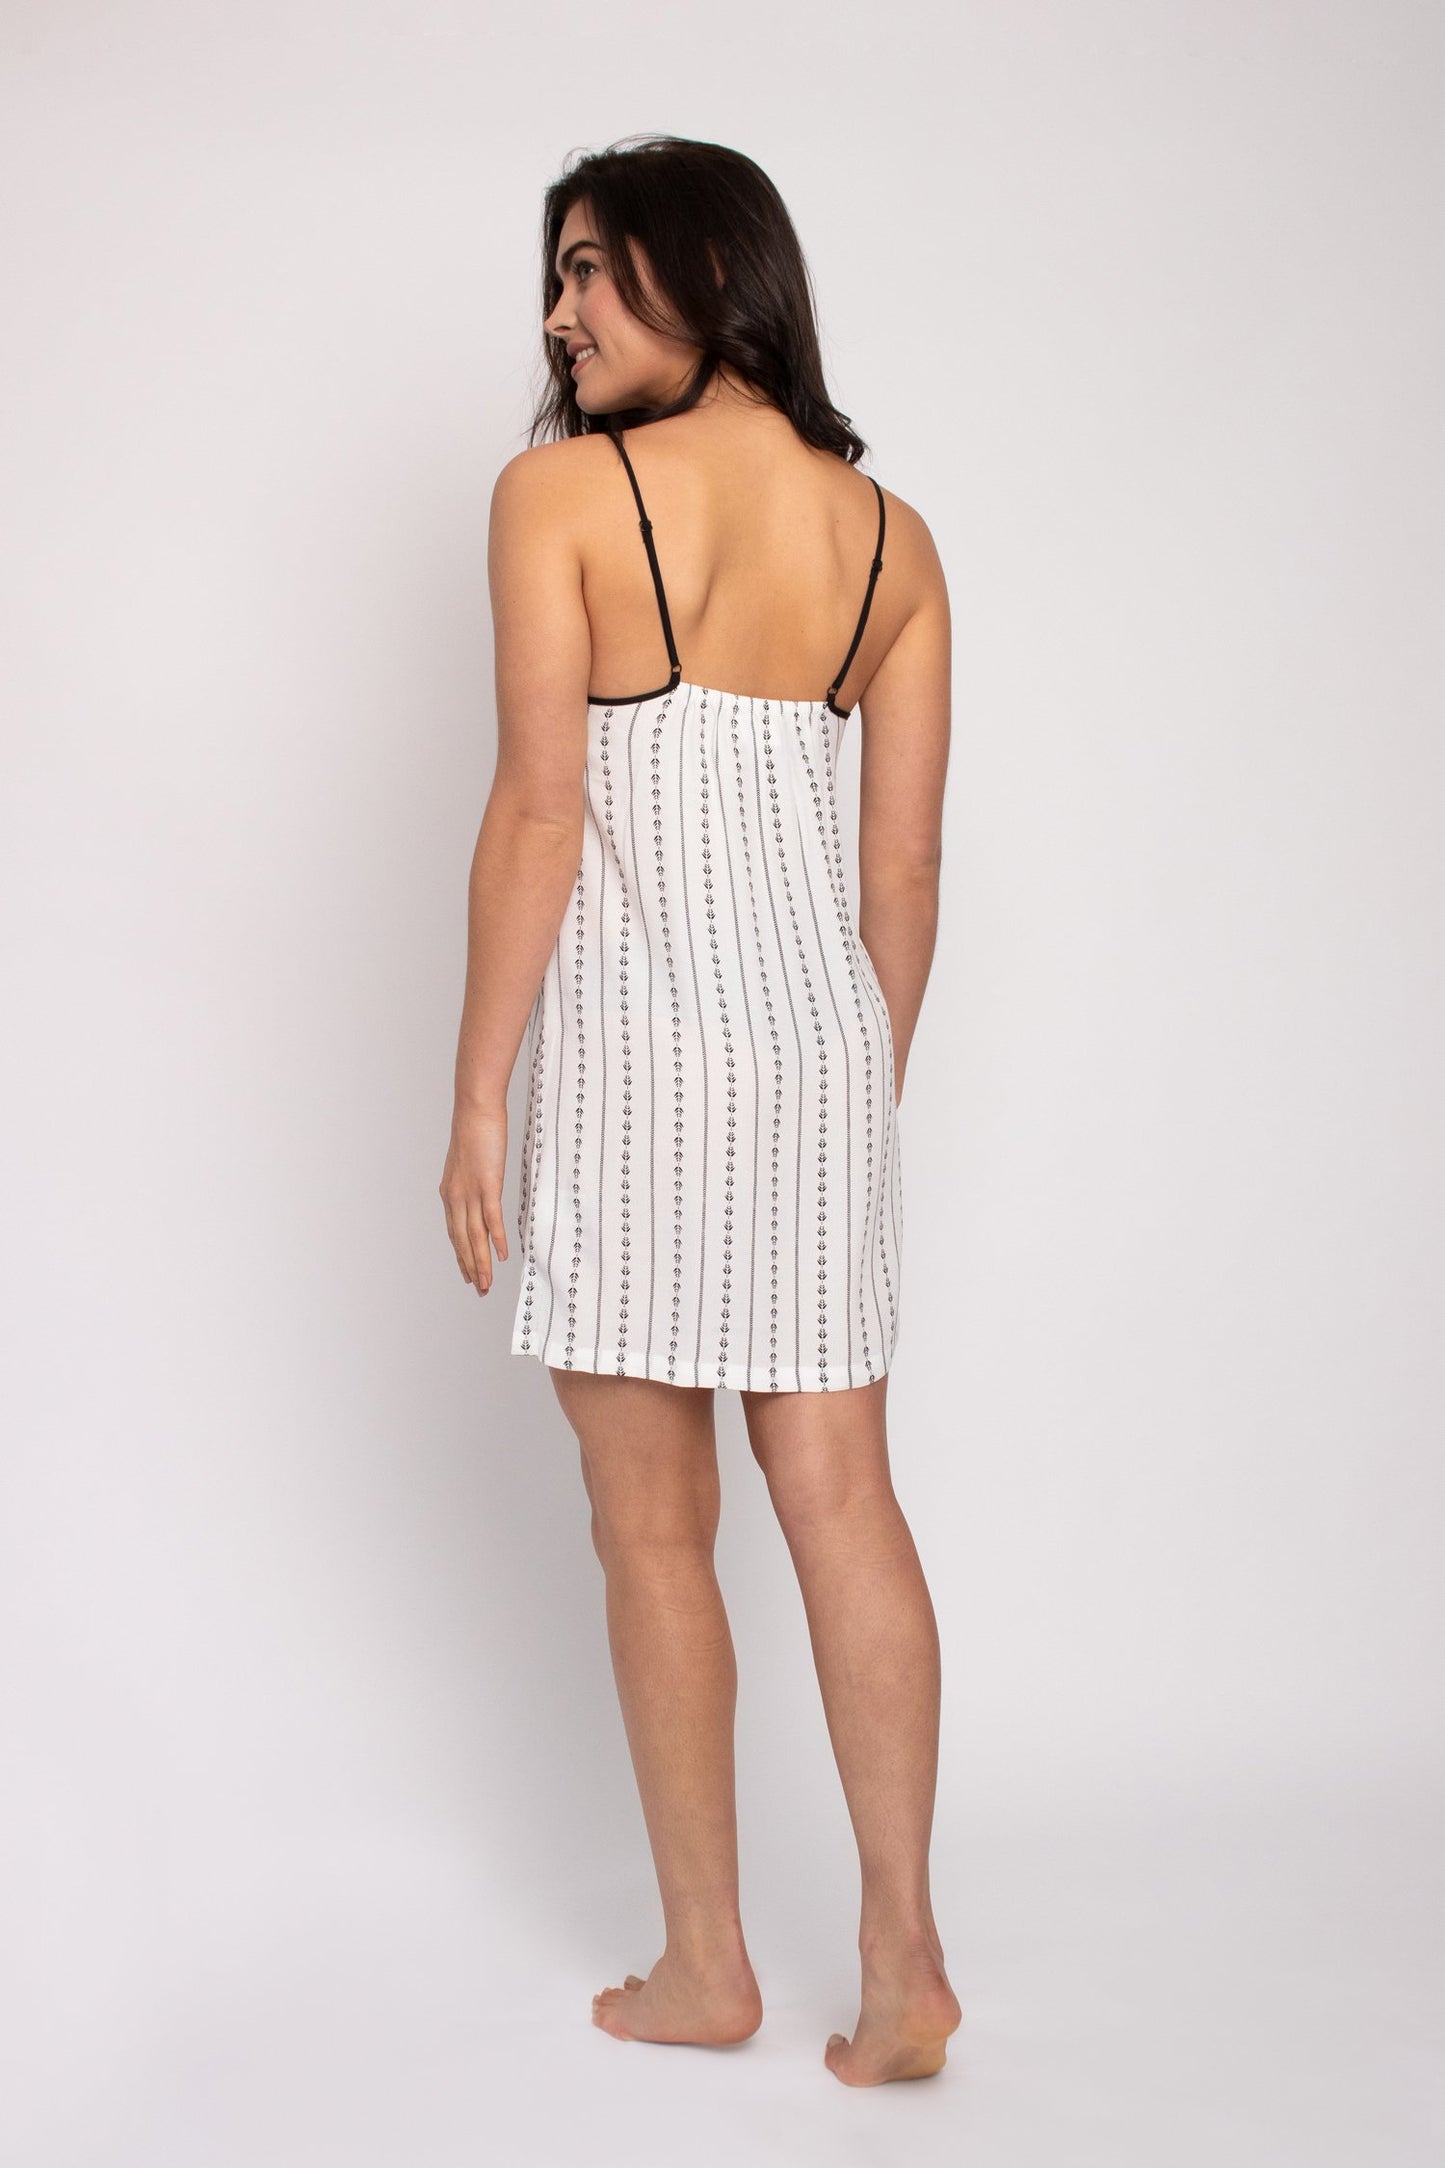 Women's EcoVero Chemise Nightdress in Ecru Stripe with leaf print and adjustable straps from Pretty You London